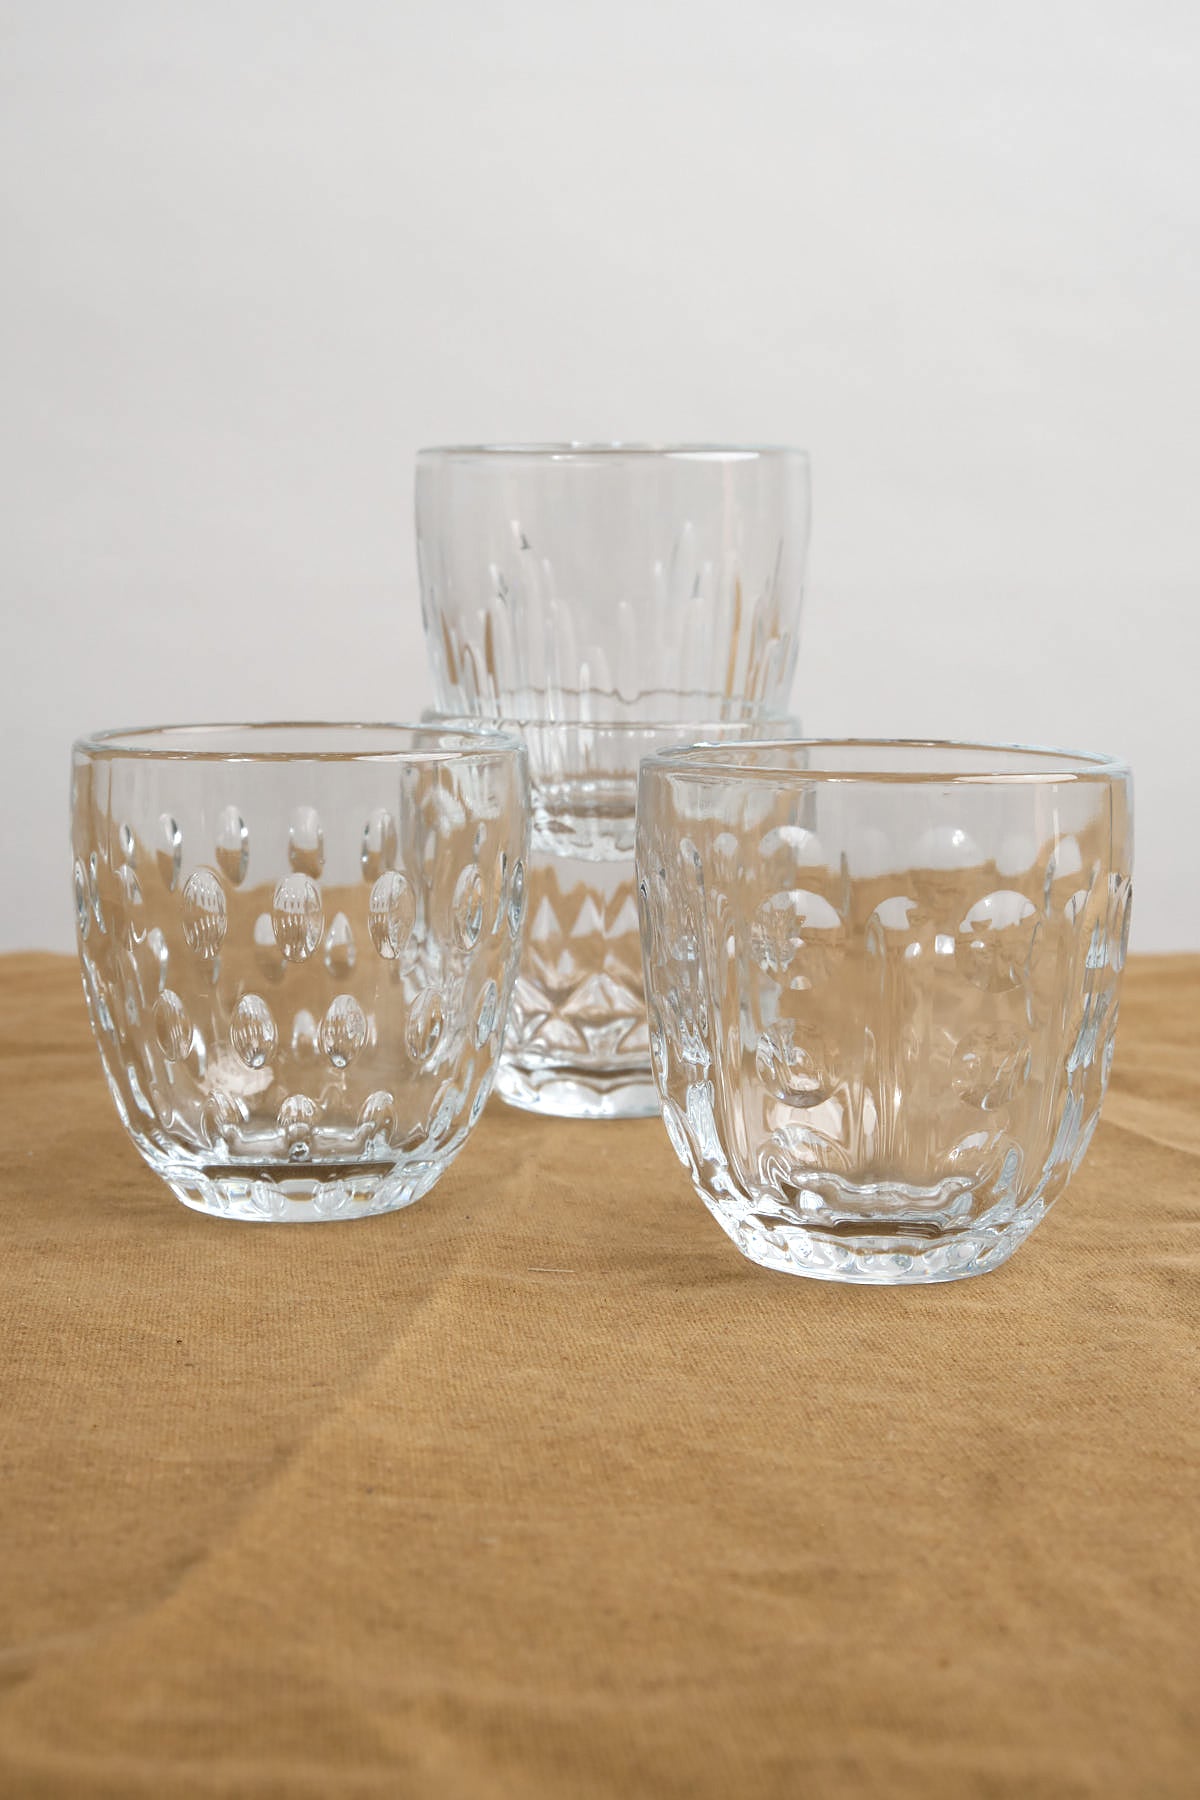 La Rochere Troquet Tumblers with Modern Bistro Chic Styling